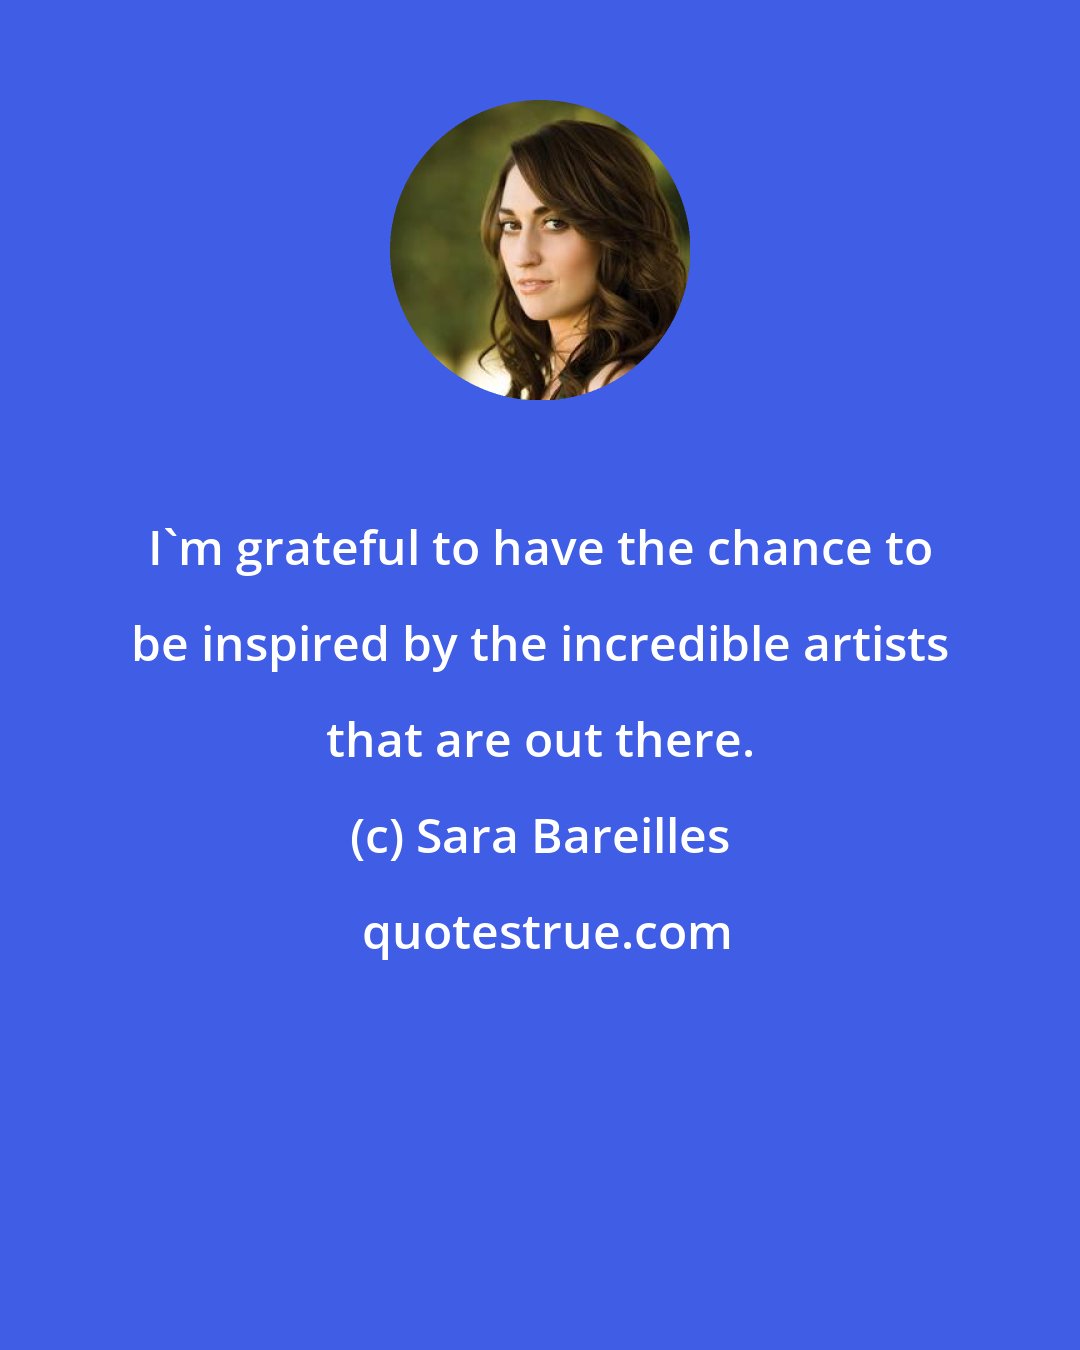 Sara Bareilles: I'm grateful to have the chance to be inspired by the incredible artists that are out there.